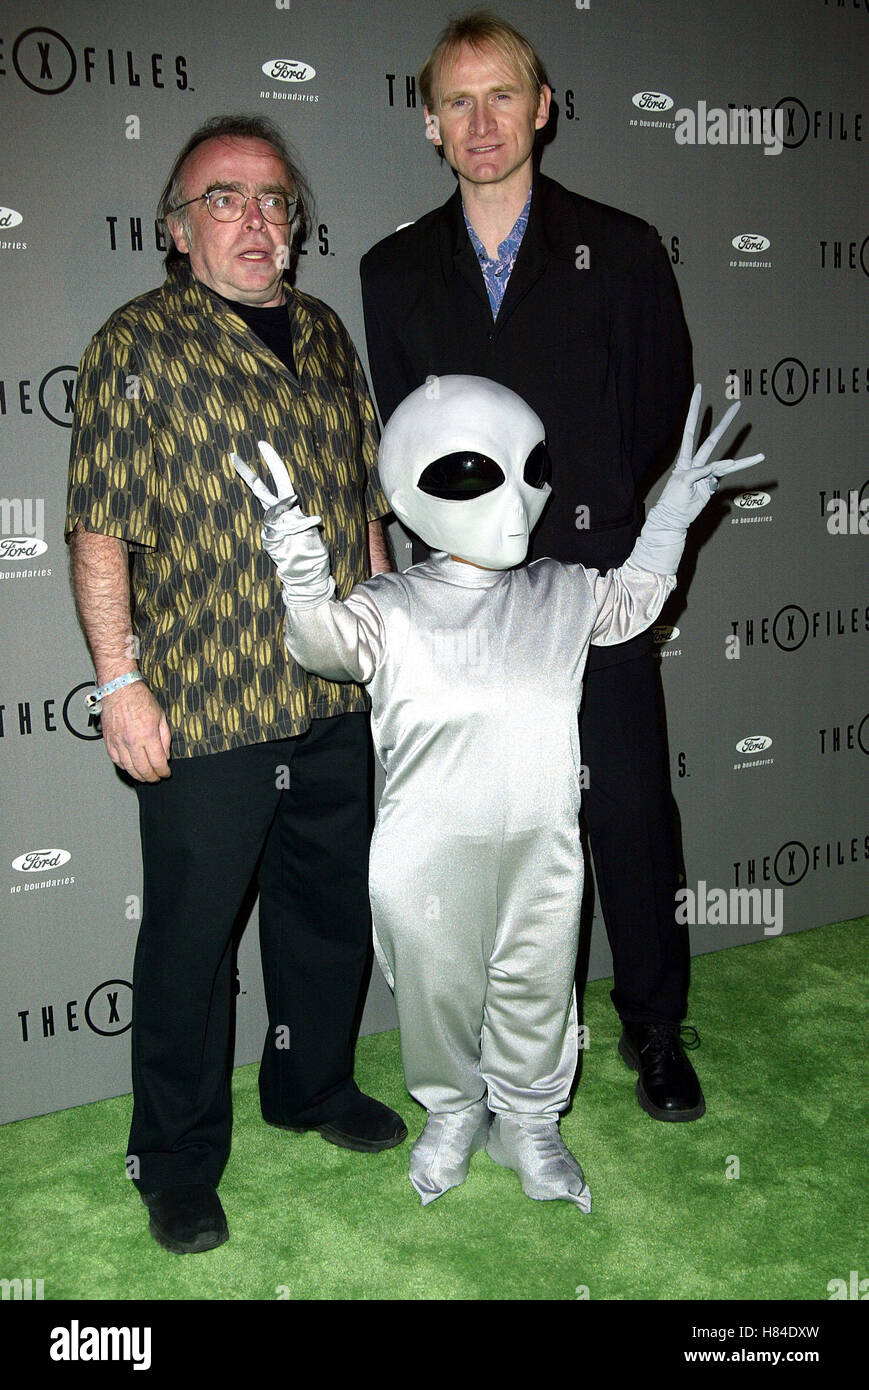 TOM BRAIDWOOD & DEAN HAGLUND X-FILES FINALE WARP PARTY HOUSE OF BLUES HOLLYWOOD LOS ANGELES USA 27 April 2002 Stock Photo